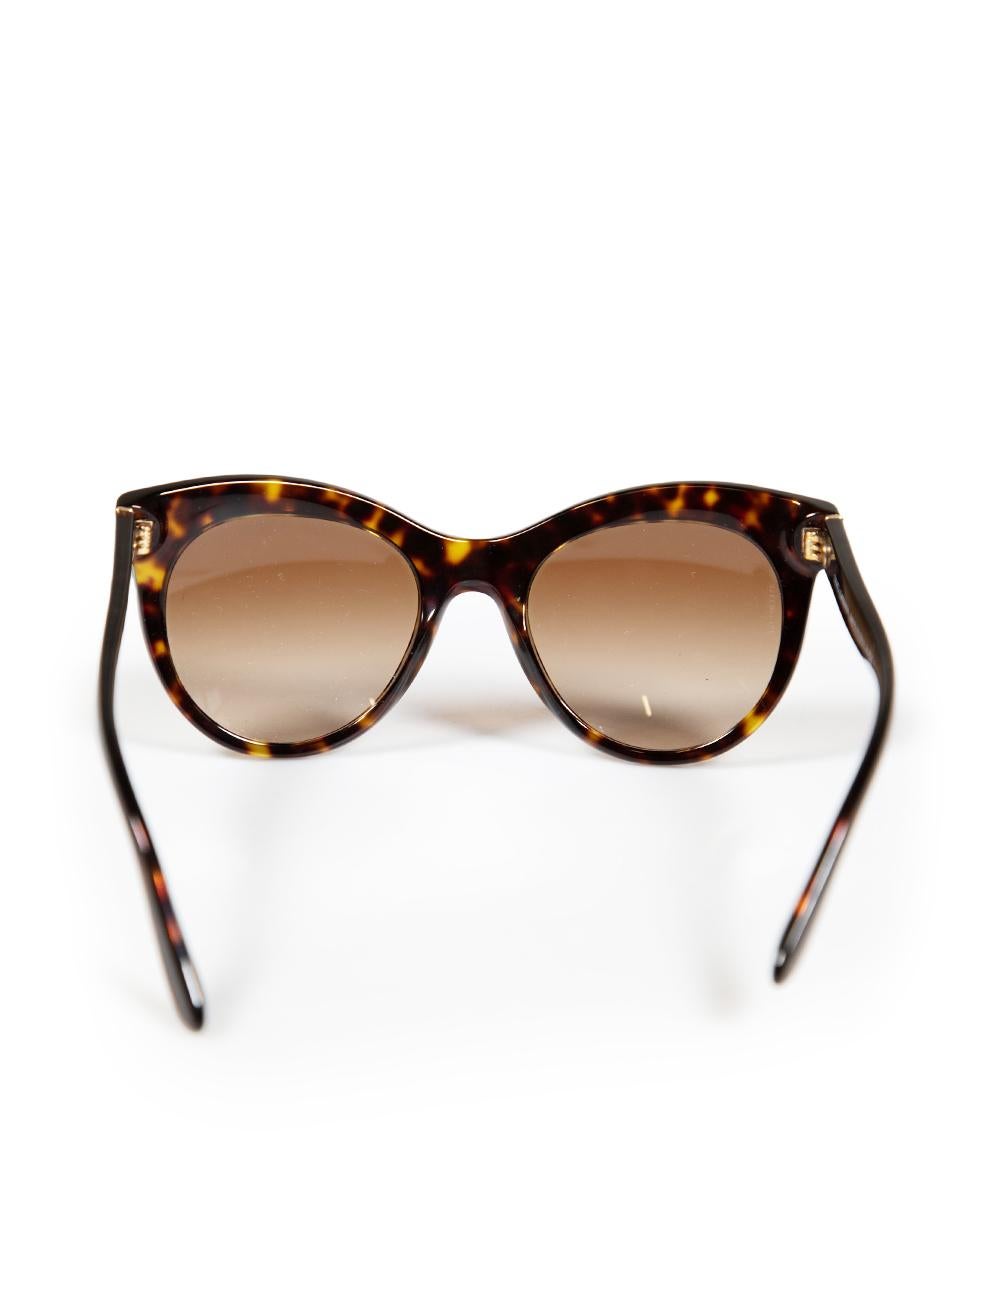 Dolce & Gabbana Brown Gradient Tortoiseshell Sunglasses In Good Condition For Sale In London, GB